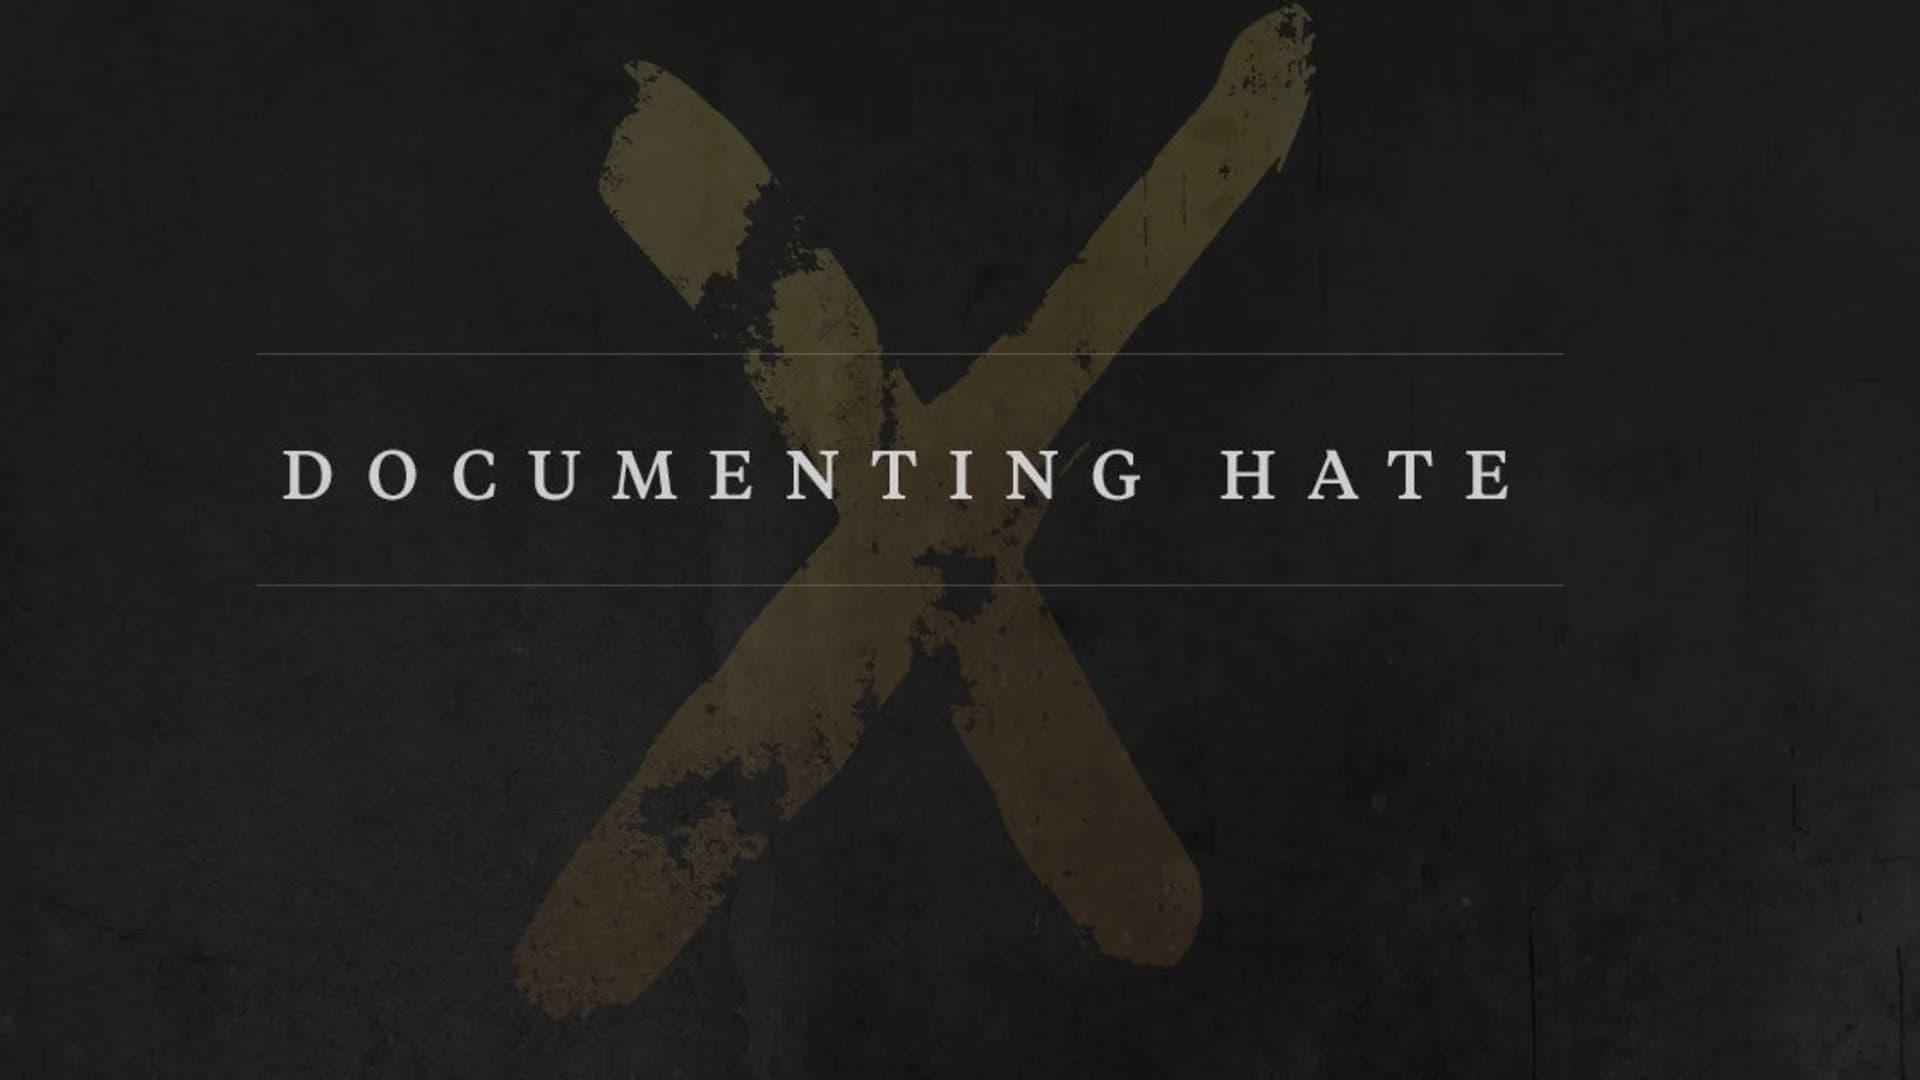 Turn to Tara partners with Documenting Hate to report on hate crimes